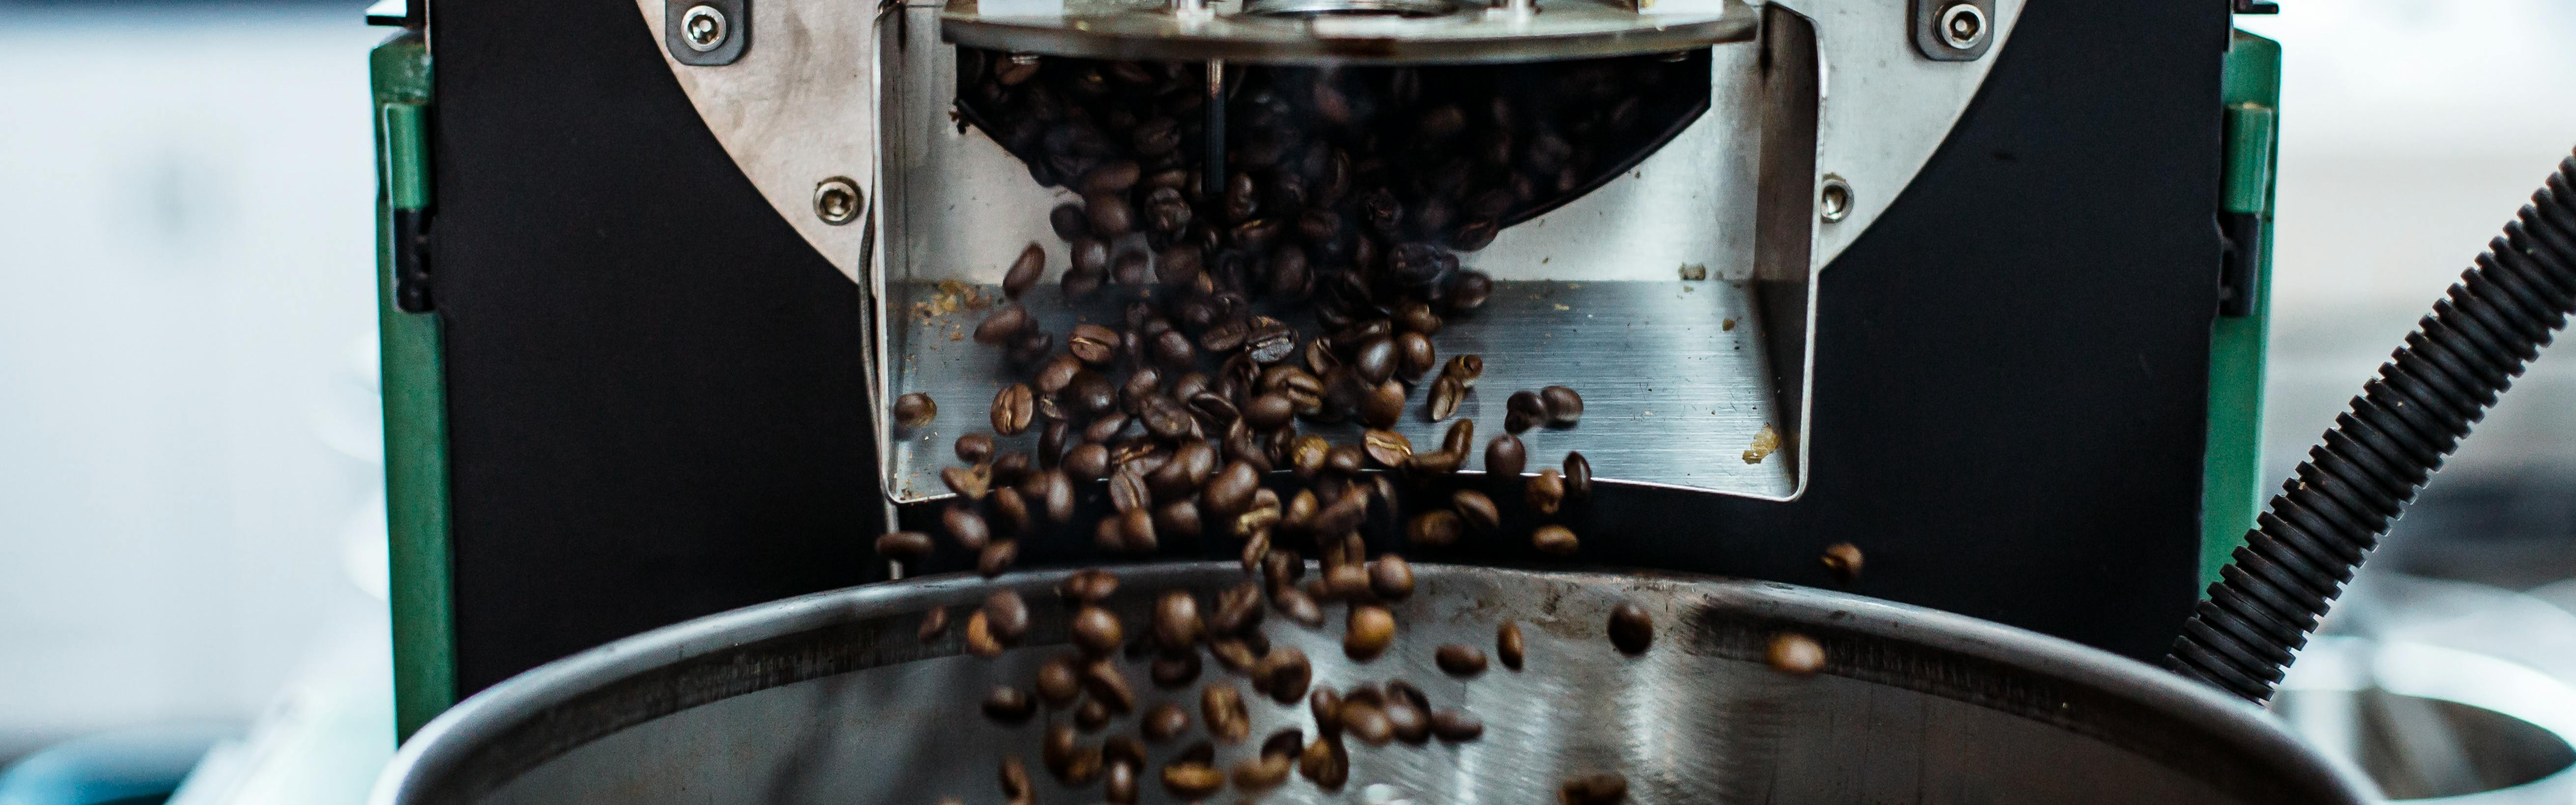 6 Mistakes People Make With Their Espresso Machines » CoffeeGeek